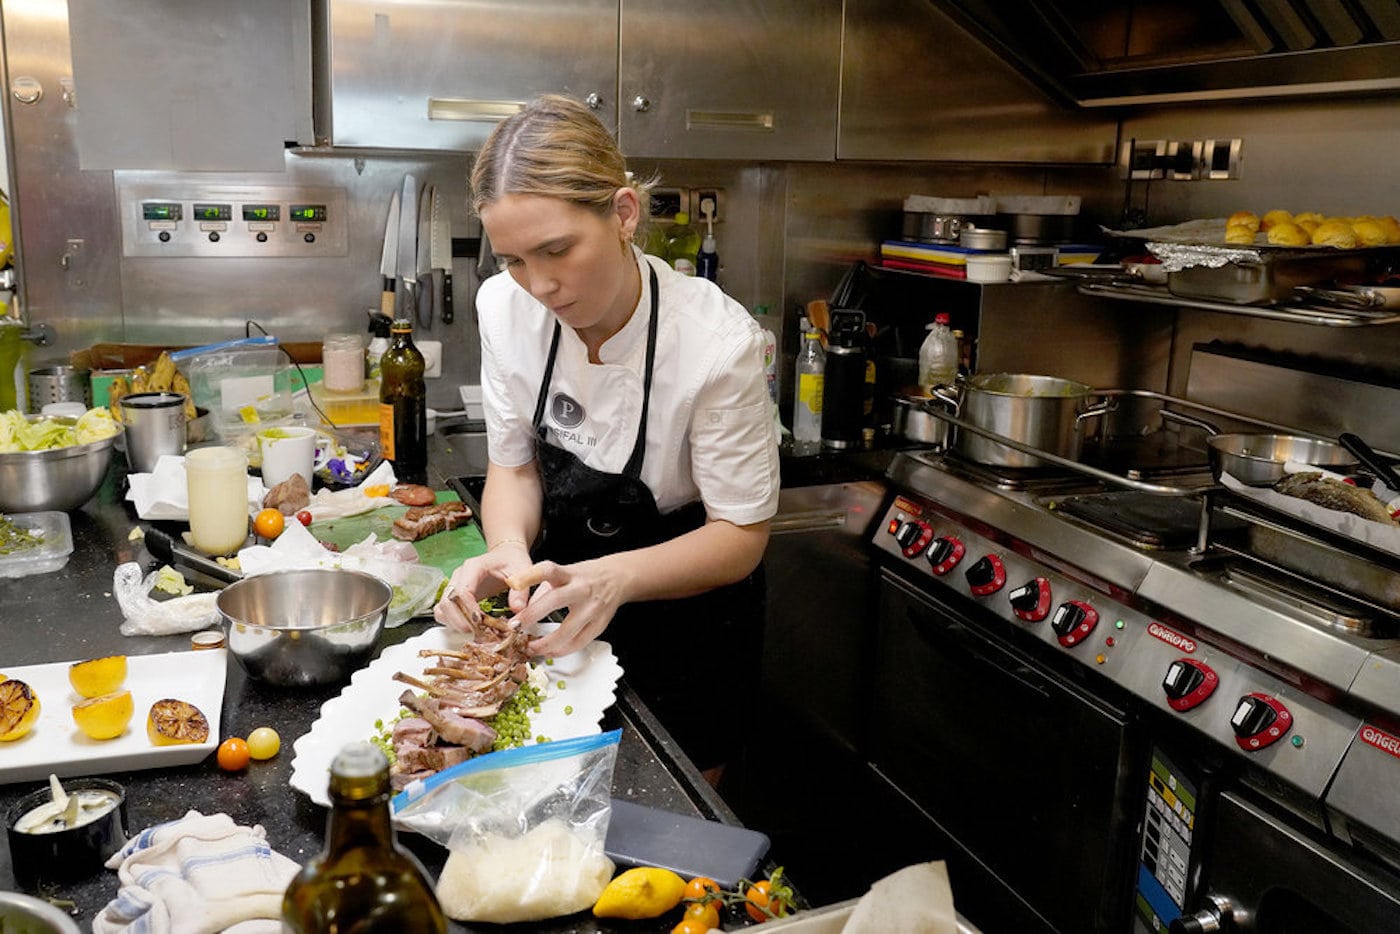 Chef Ileisha Dell prepares a meal in the 'Below Deck Sailing Yacht' galley